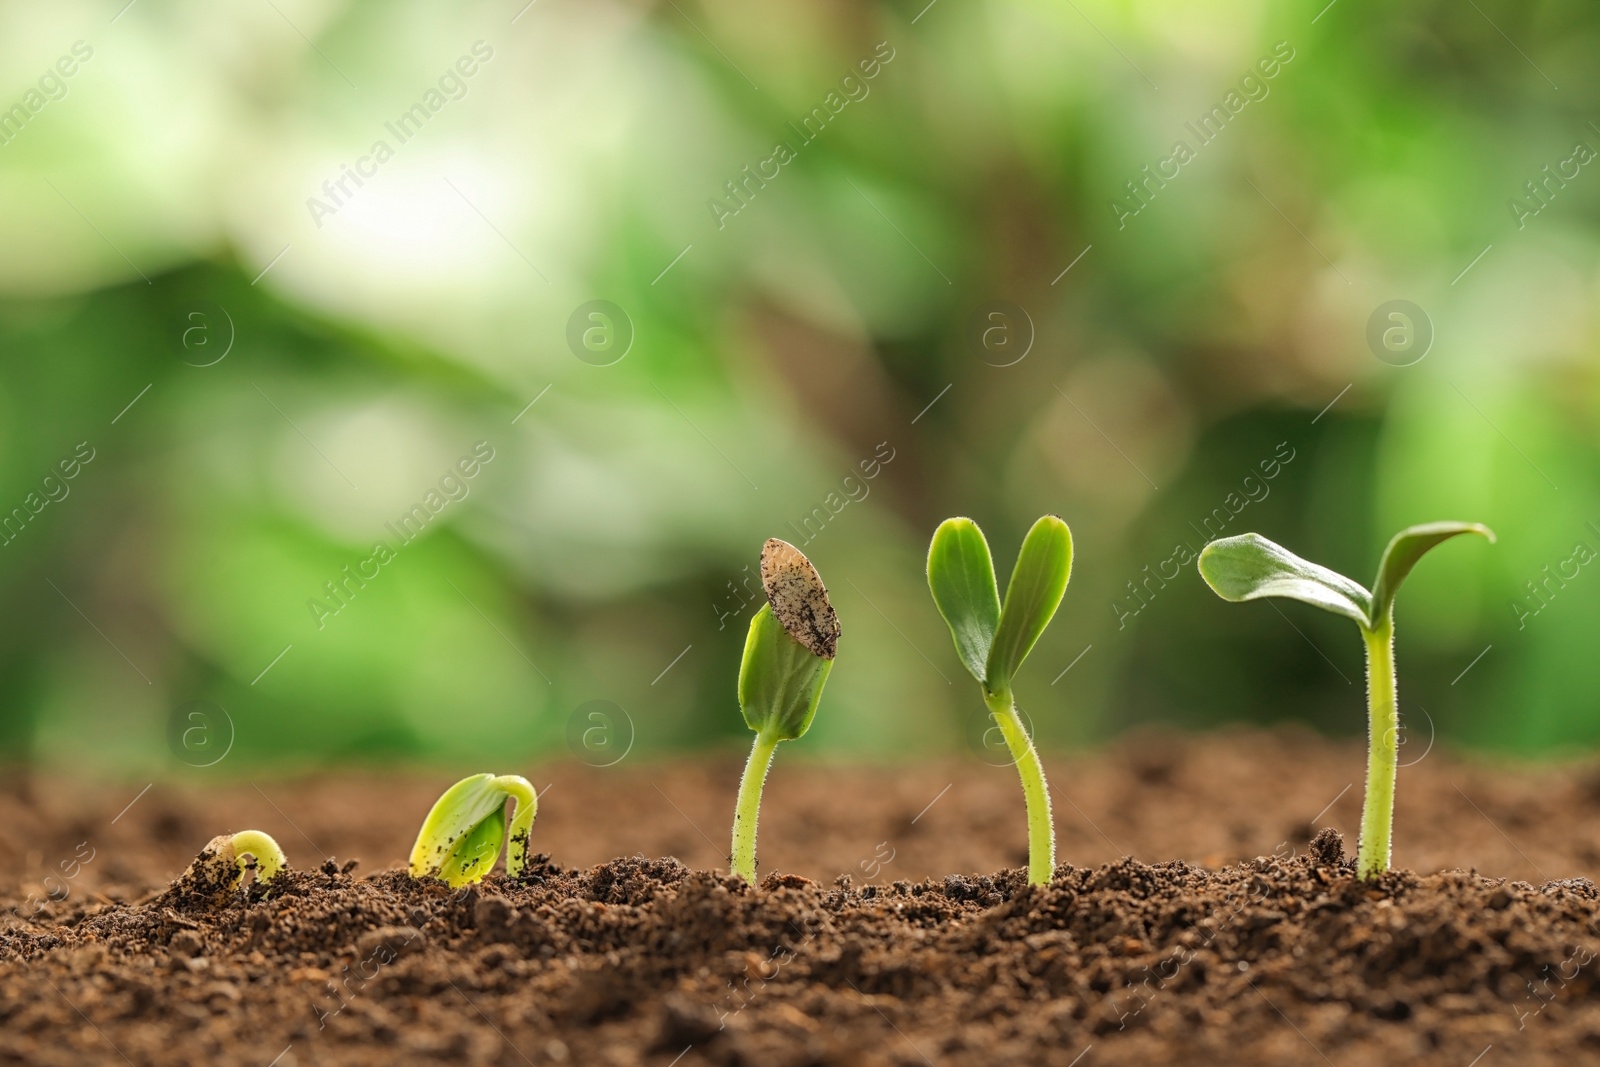 Photo of Little green seedlings growing in soil against blurred background